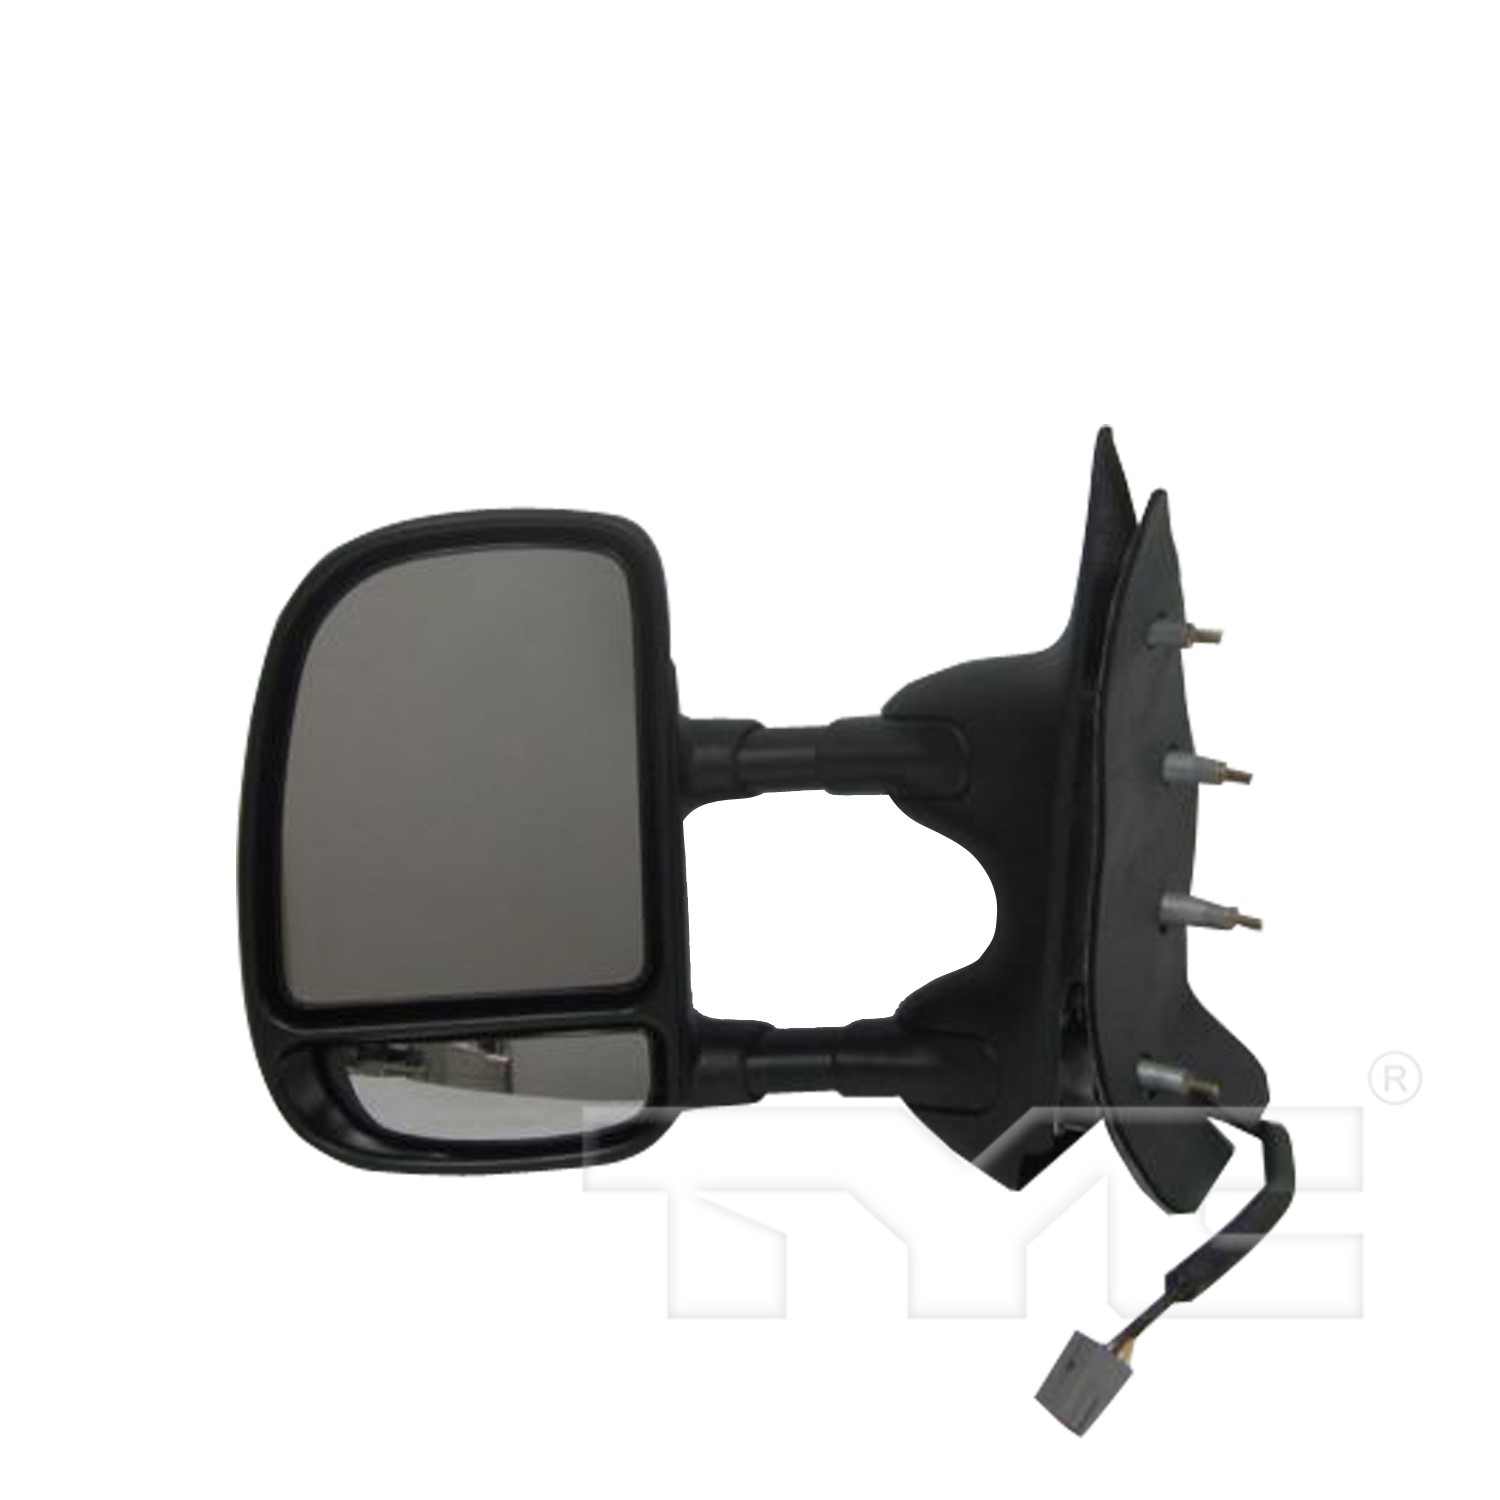 Aftermarket MIRRORS for FORD - E-450 SUPER DUTY, E-450 SUPER DUTY,09-21,LT Mirror outside rear view